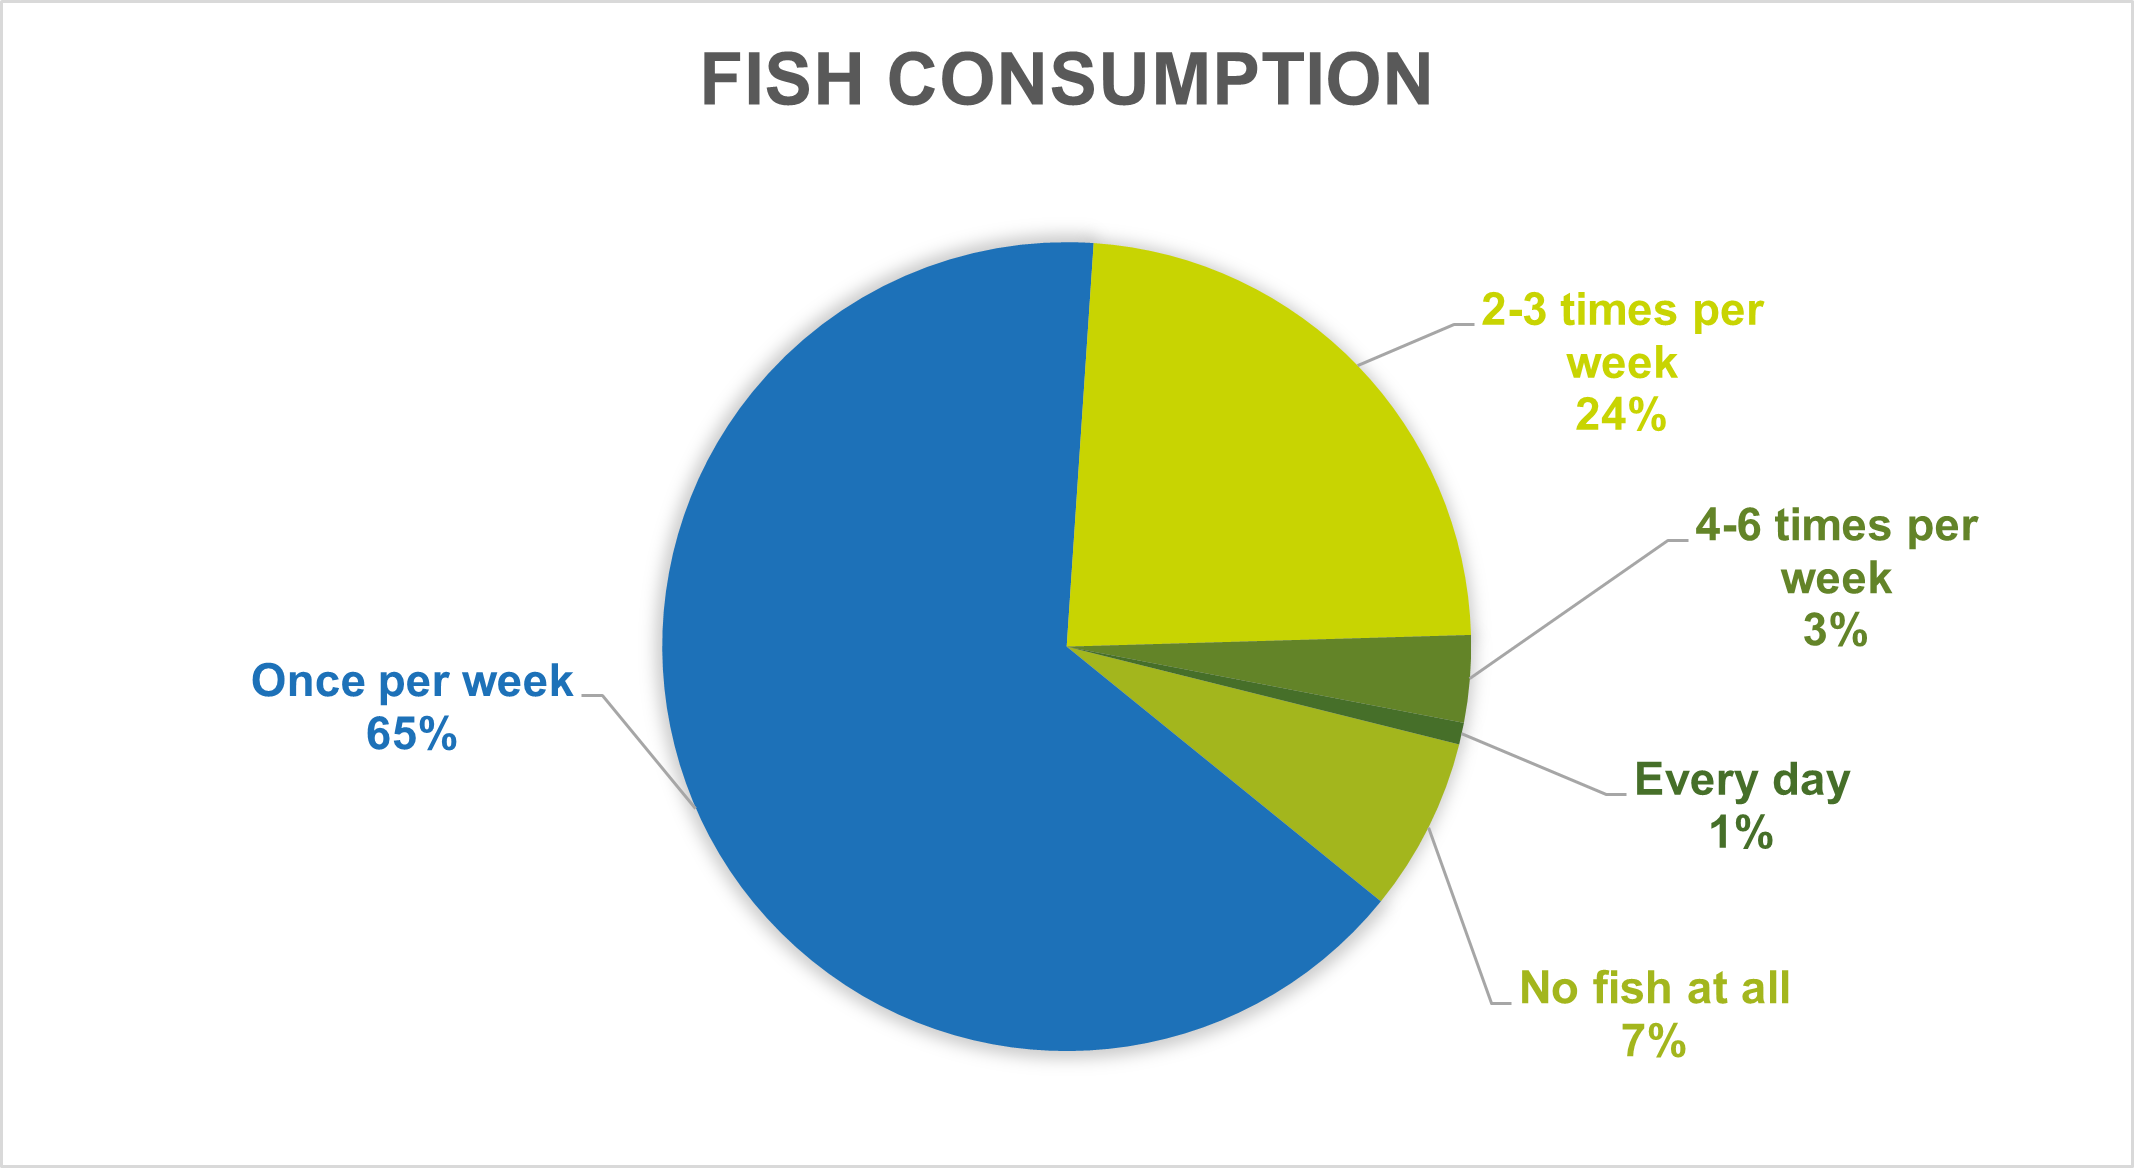 Pie chart showing fish consumption frequency